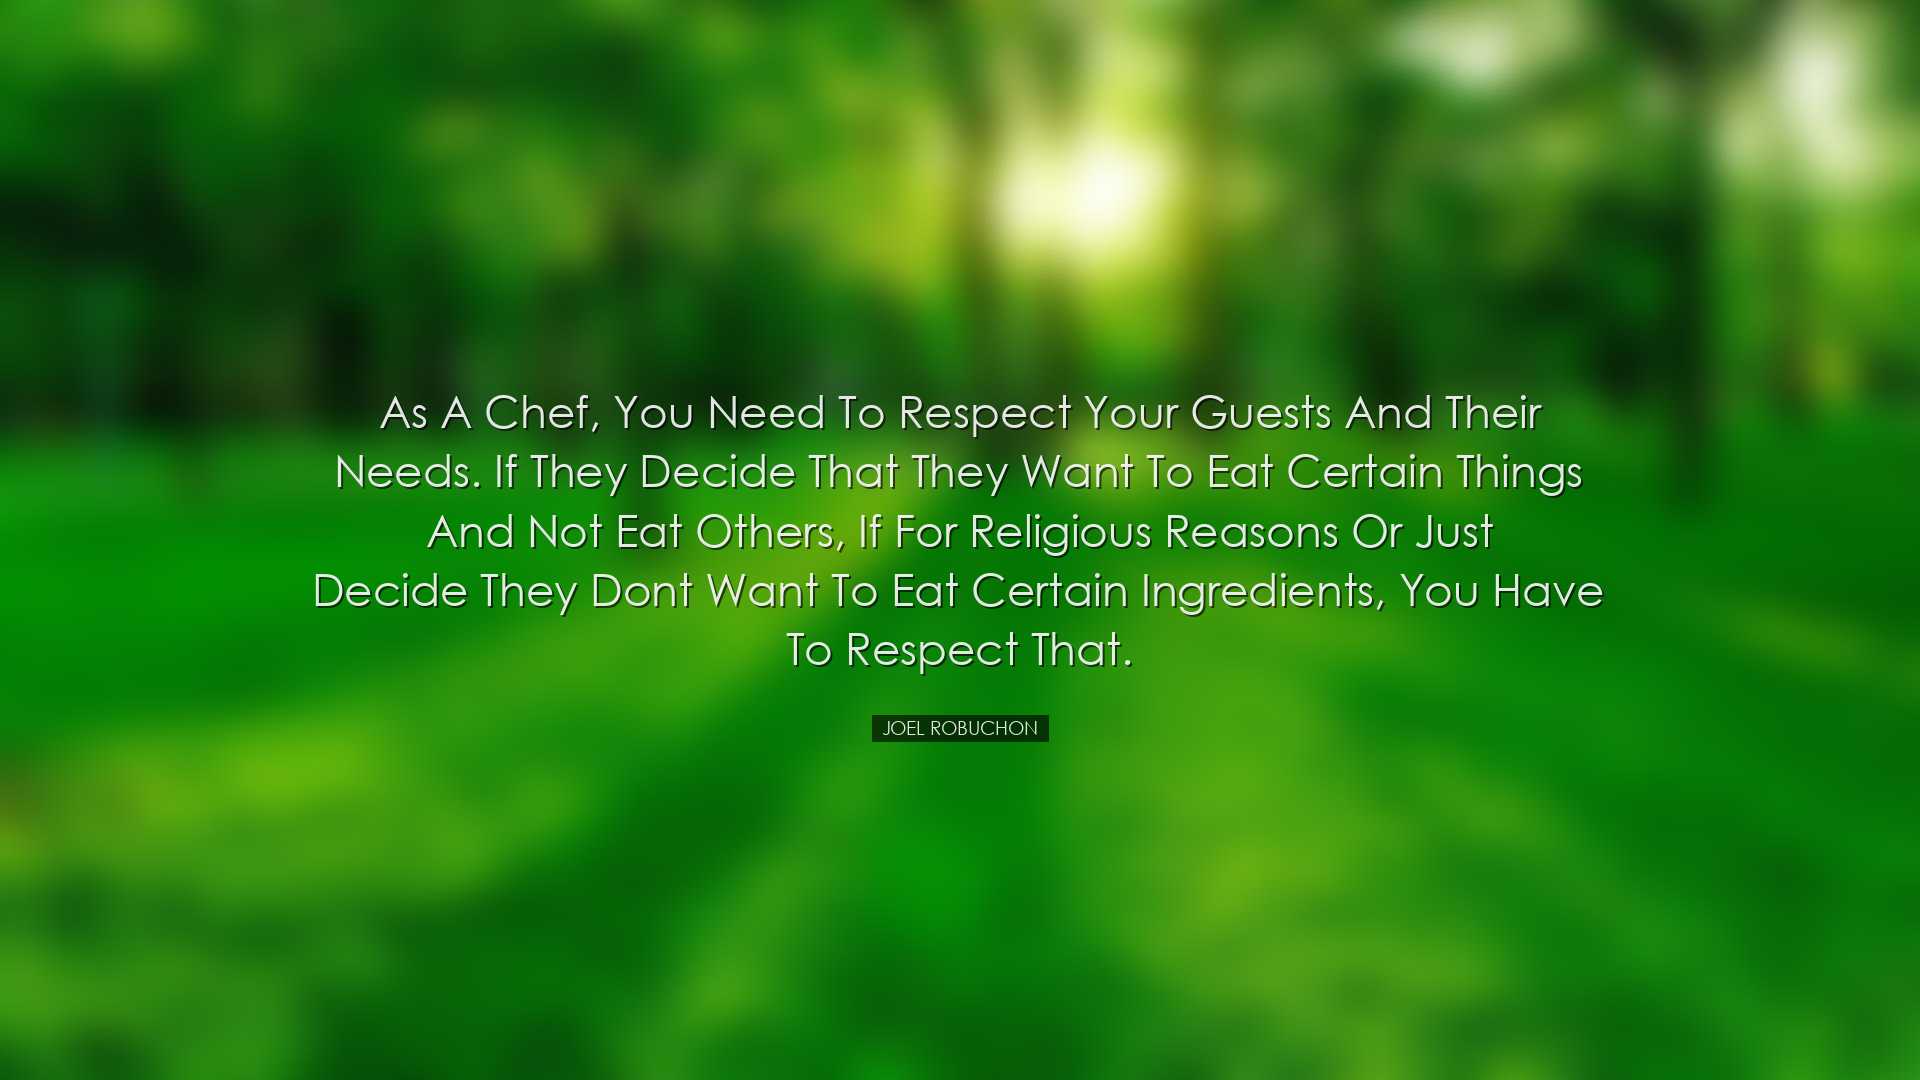 As a chef, you need to respect your guests and their needs. If the